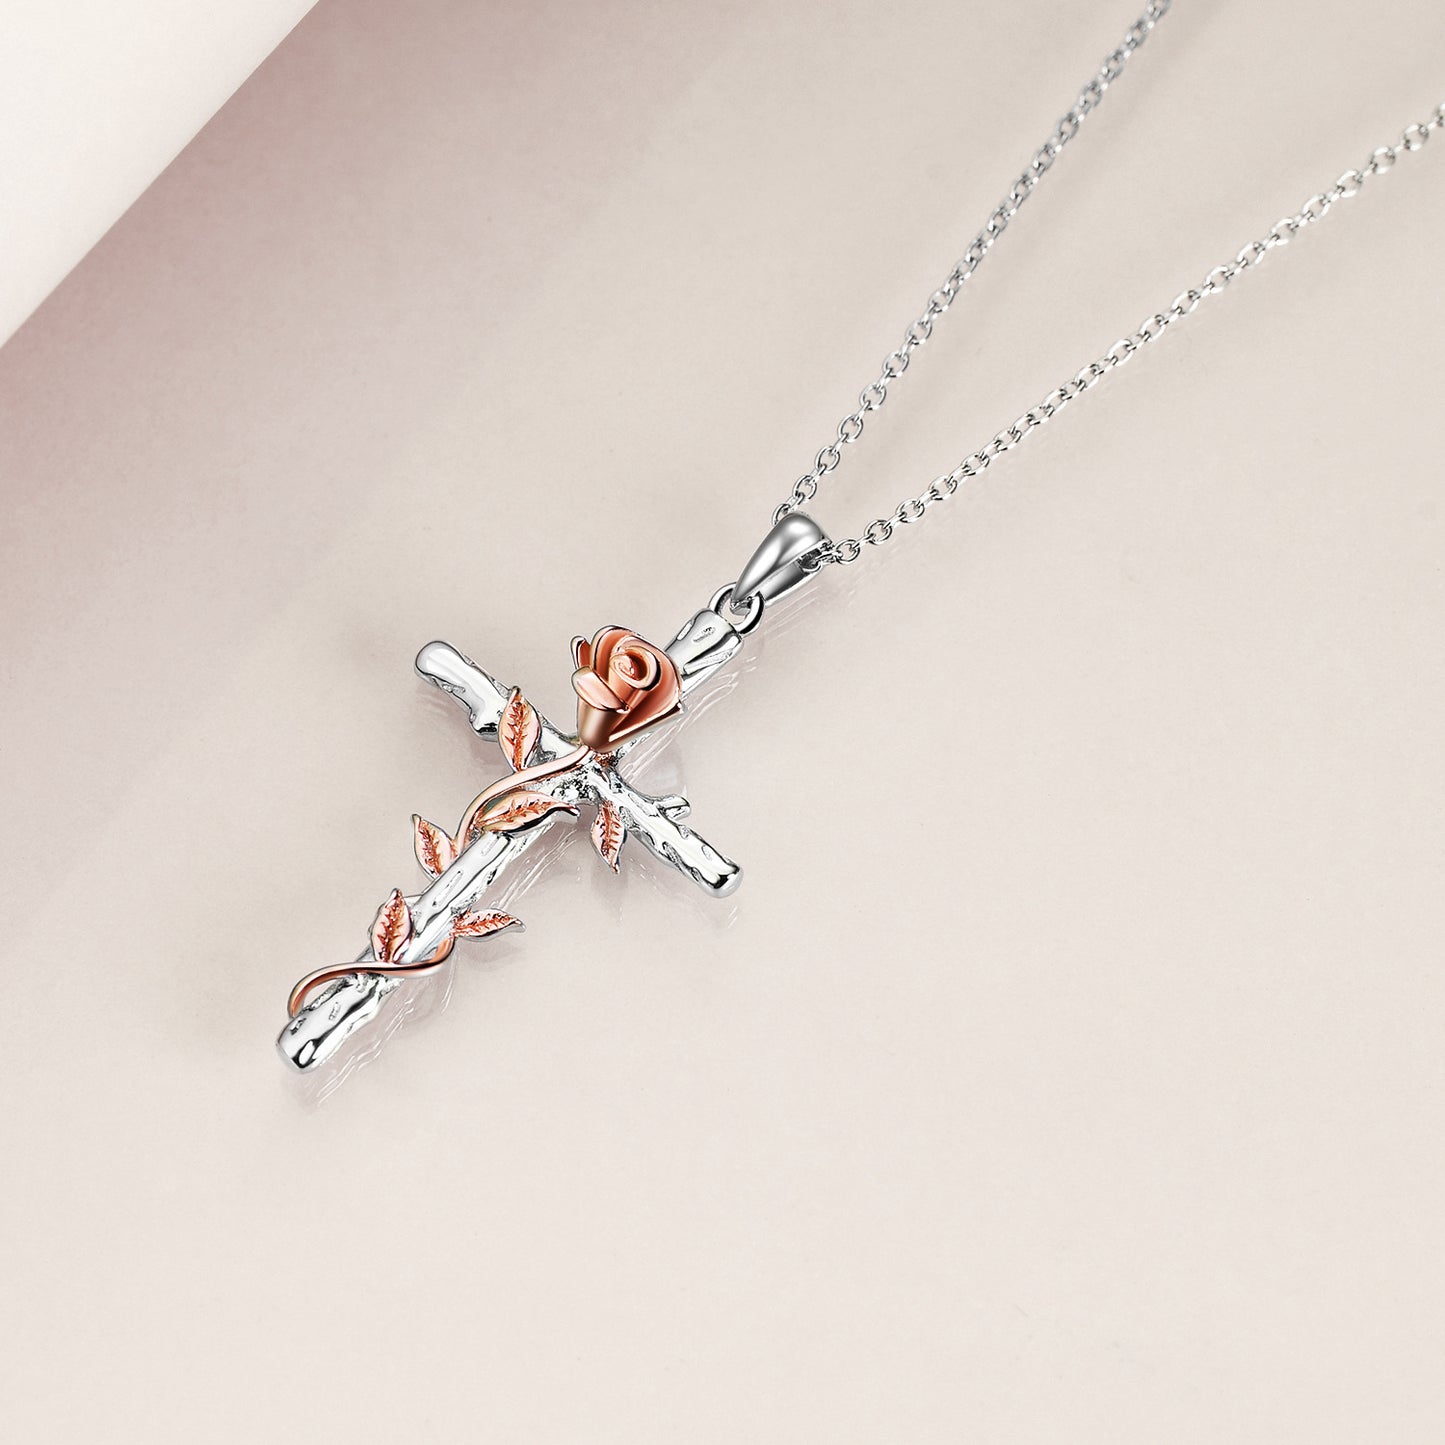 YFN S925 Rose Gold Plated Religious Cross Pendant Necklace with Rose Flower Jewelry  (Gift Box included)